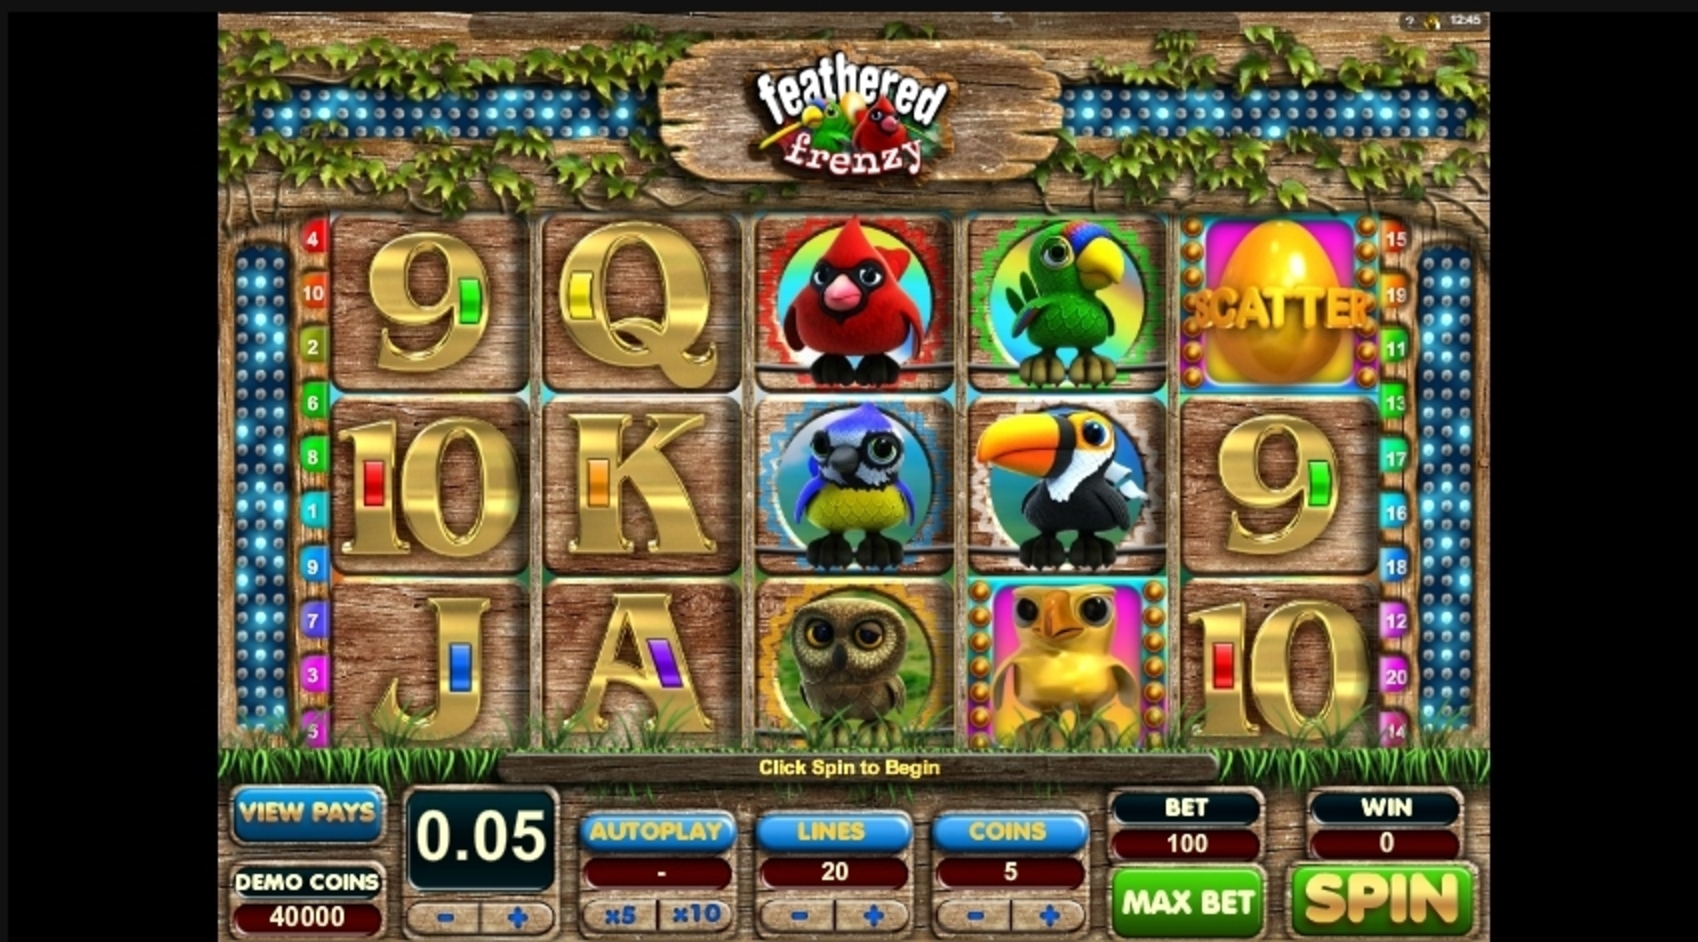 Reels in Feathered Frenzy Slot Game by Big Time Gaming